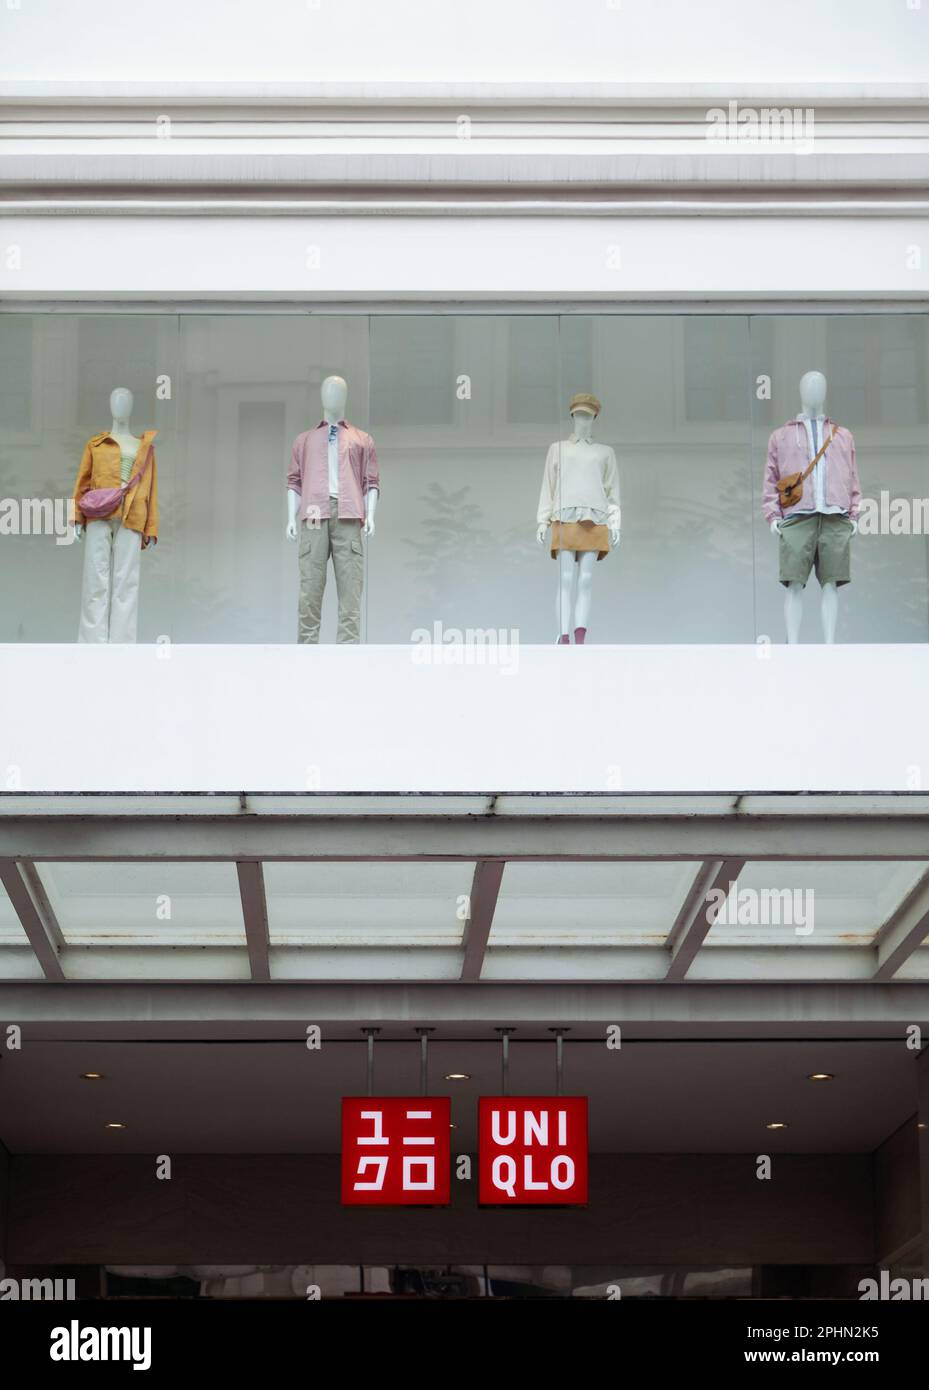 Uniqlo Shop Sign Text Store Brand Logo Japanese Casual Wear Chain Designer  Manufacturer Retailer Editorial Stock Image  Image of retailer text  276381619